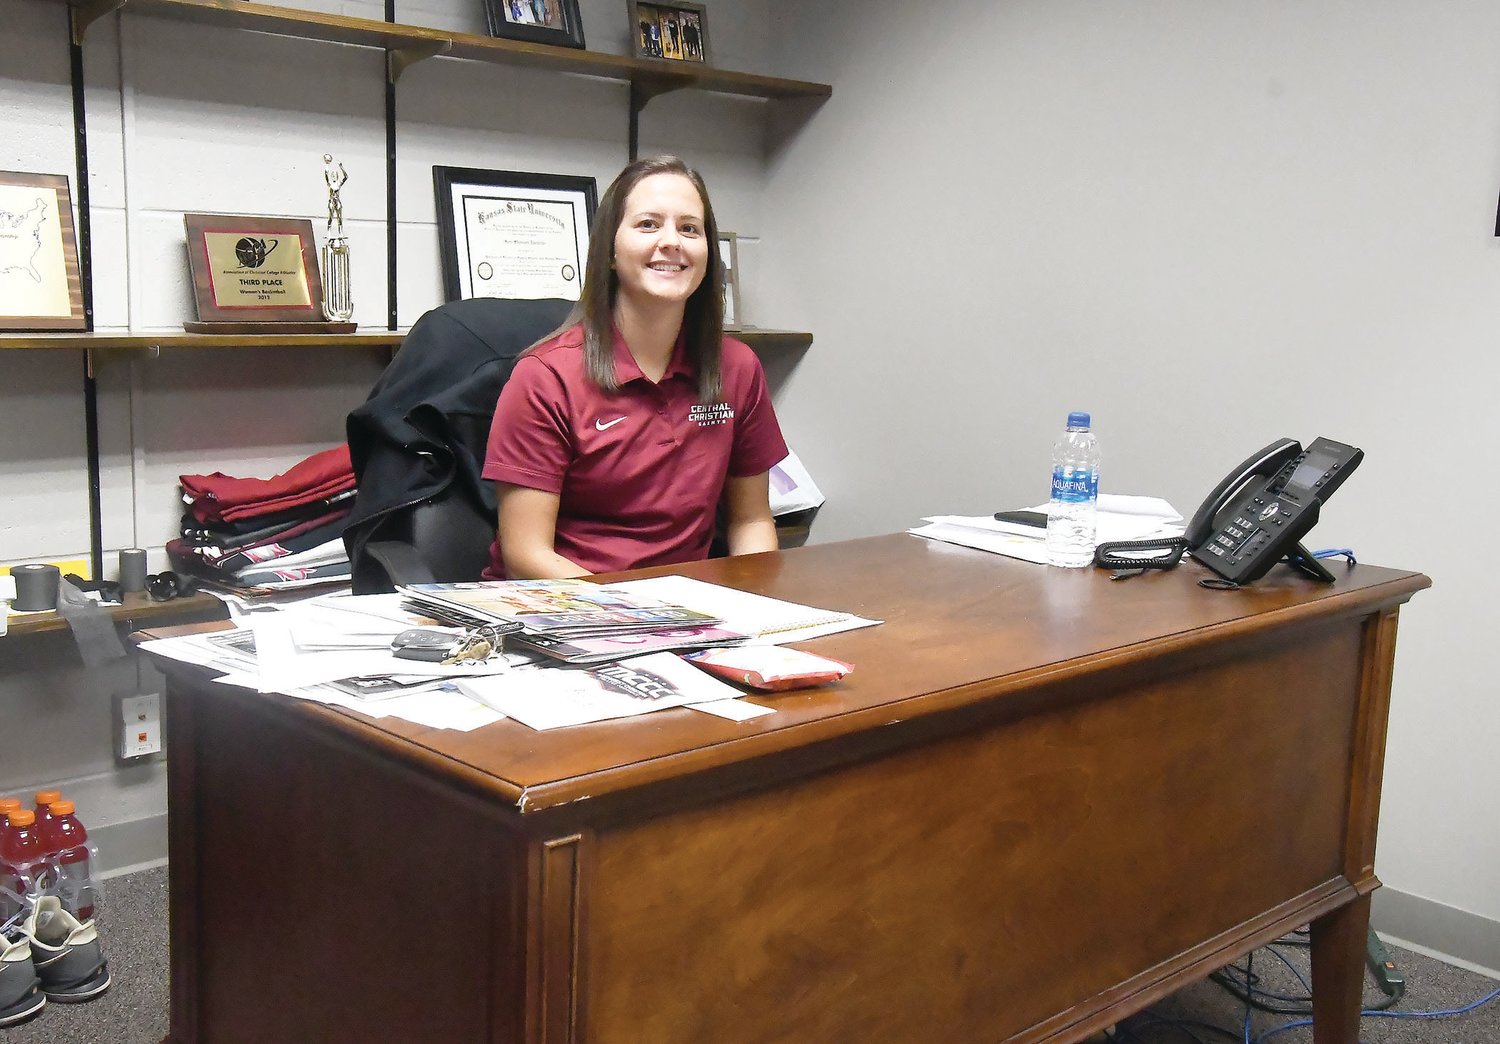 Kori Zarzutzki smiles inside her office at Pelfrey Hall on the Central Christian College of The Bible campus. Zarzutzki was recently named the small college’s athletic director. She also is entering her second year as the head women’s basketball coach.